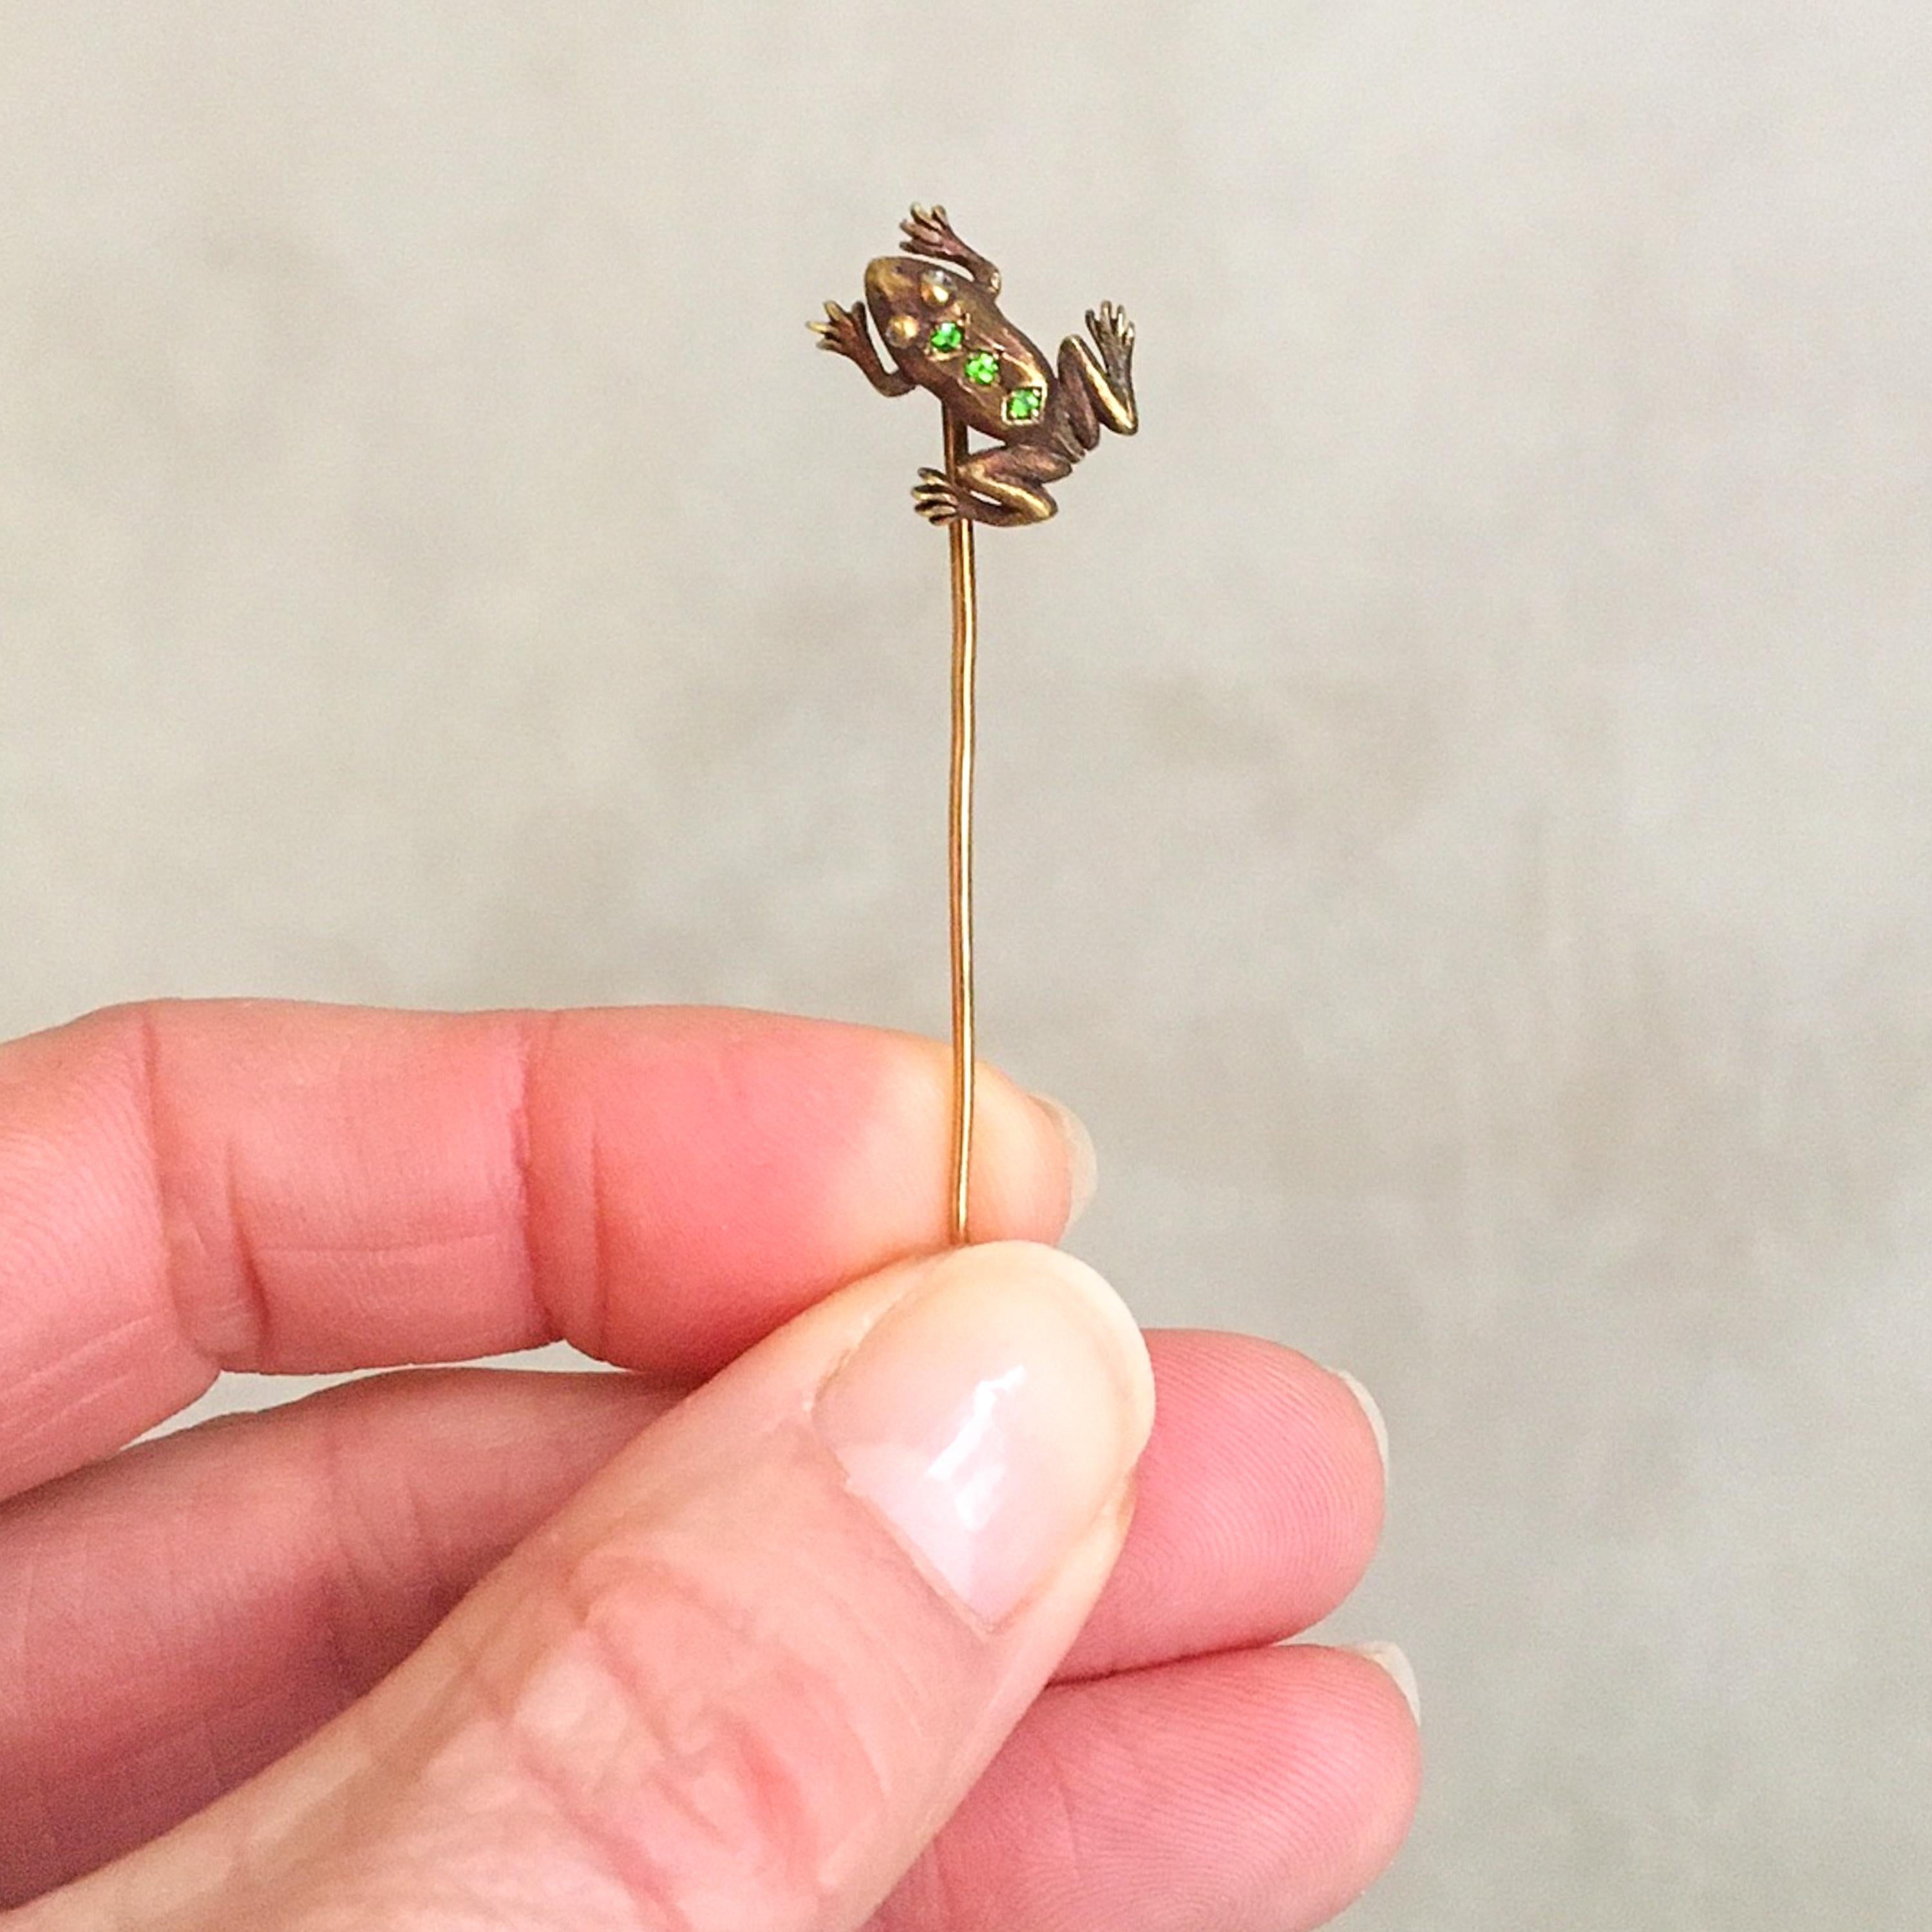 This antique Edwardian cute little frog stickpin or lapel pin is created with green peridot and bright diamond eyes. The lifelike frog is made of 14 karat gold and set with three very clear and bright green peridot stones on his back. His eyes are